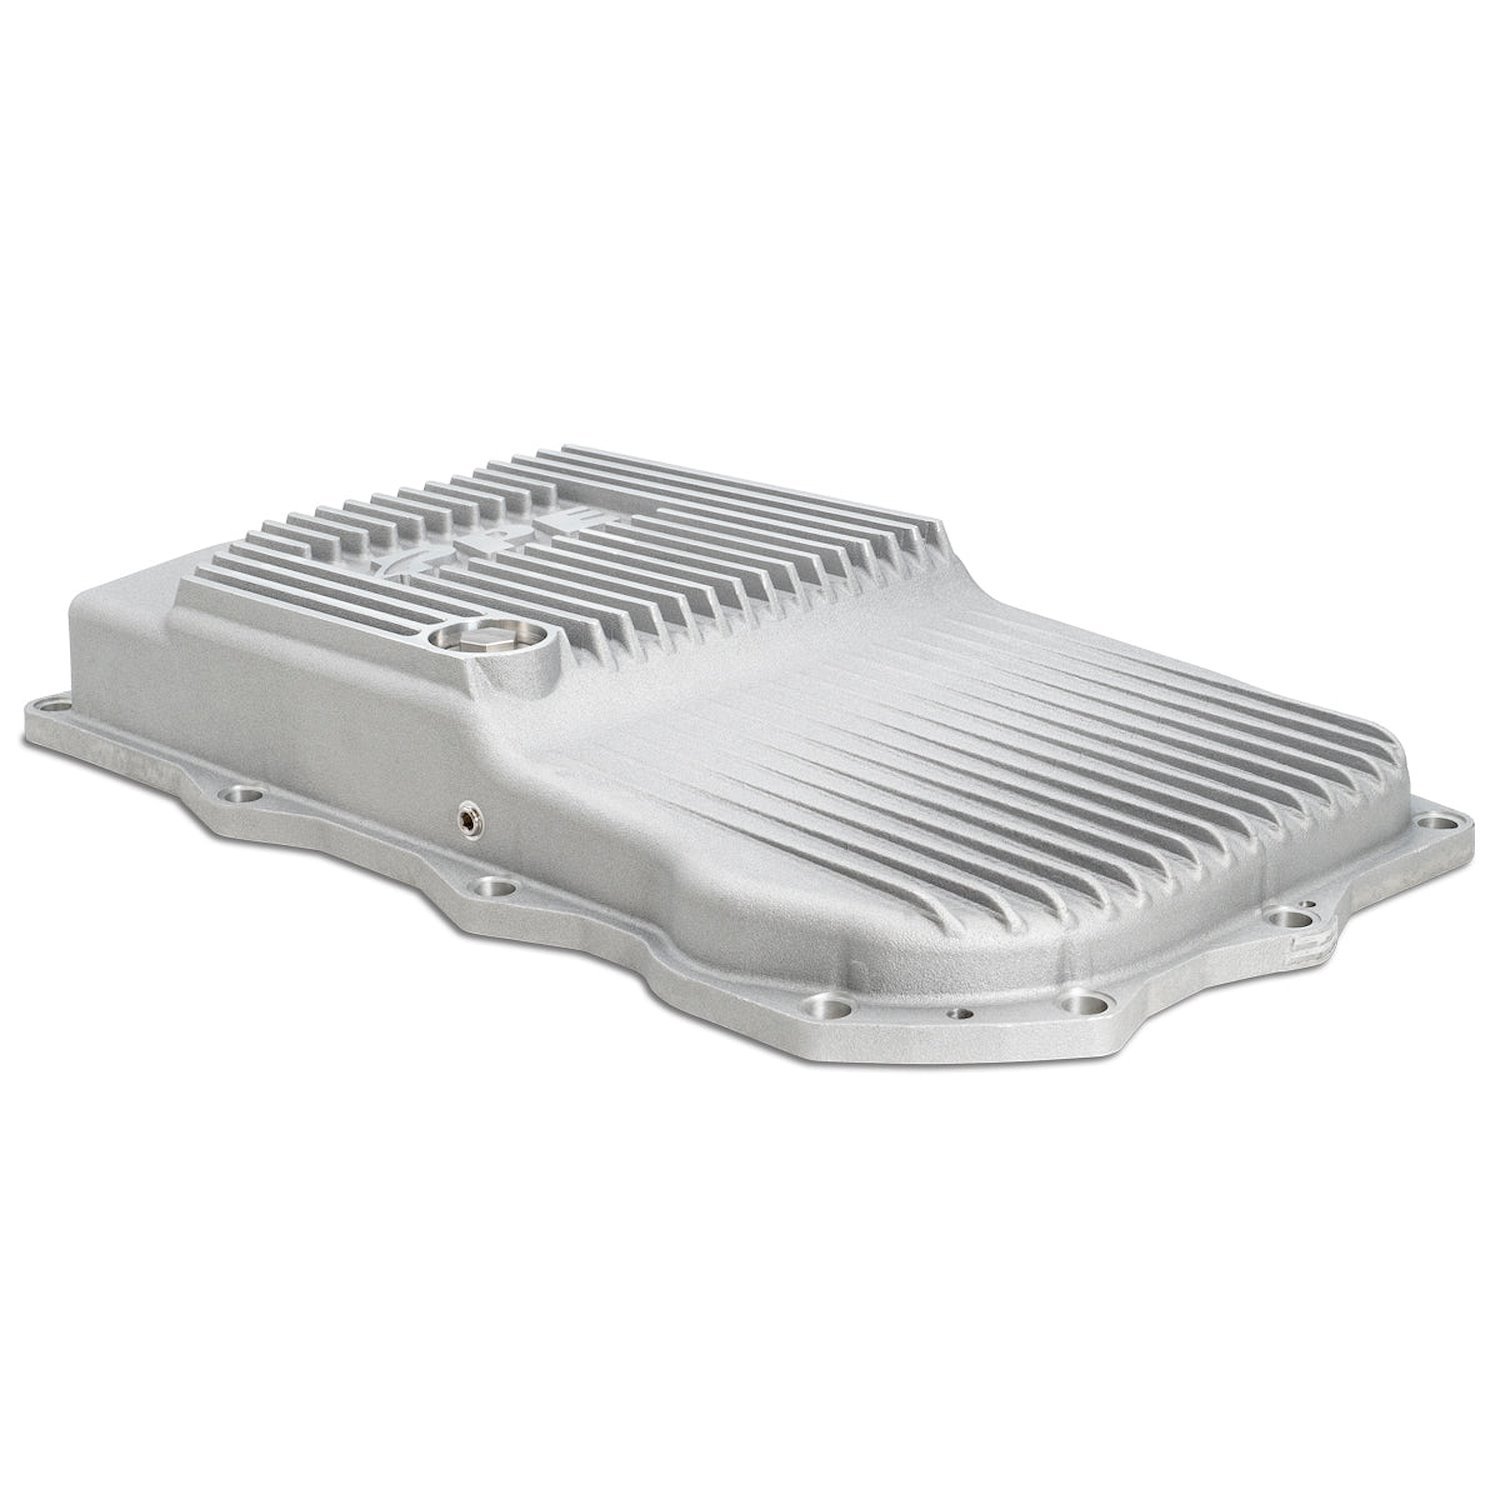 228053400 Transmission Pan for ZF 8-Speed - Heavy-Duty Cast Aluminum